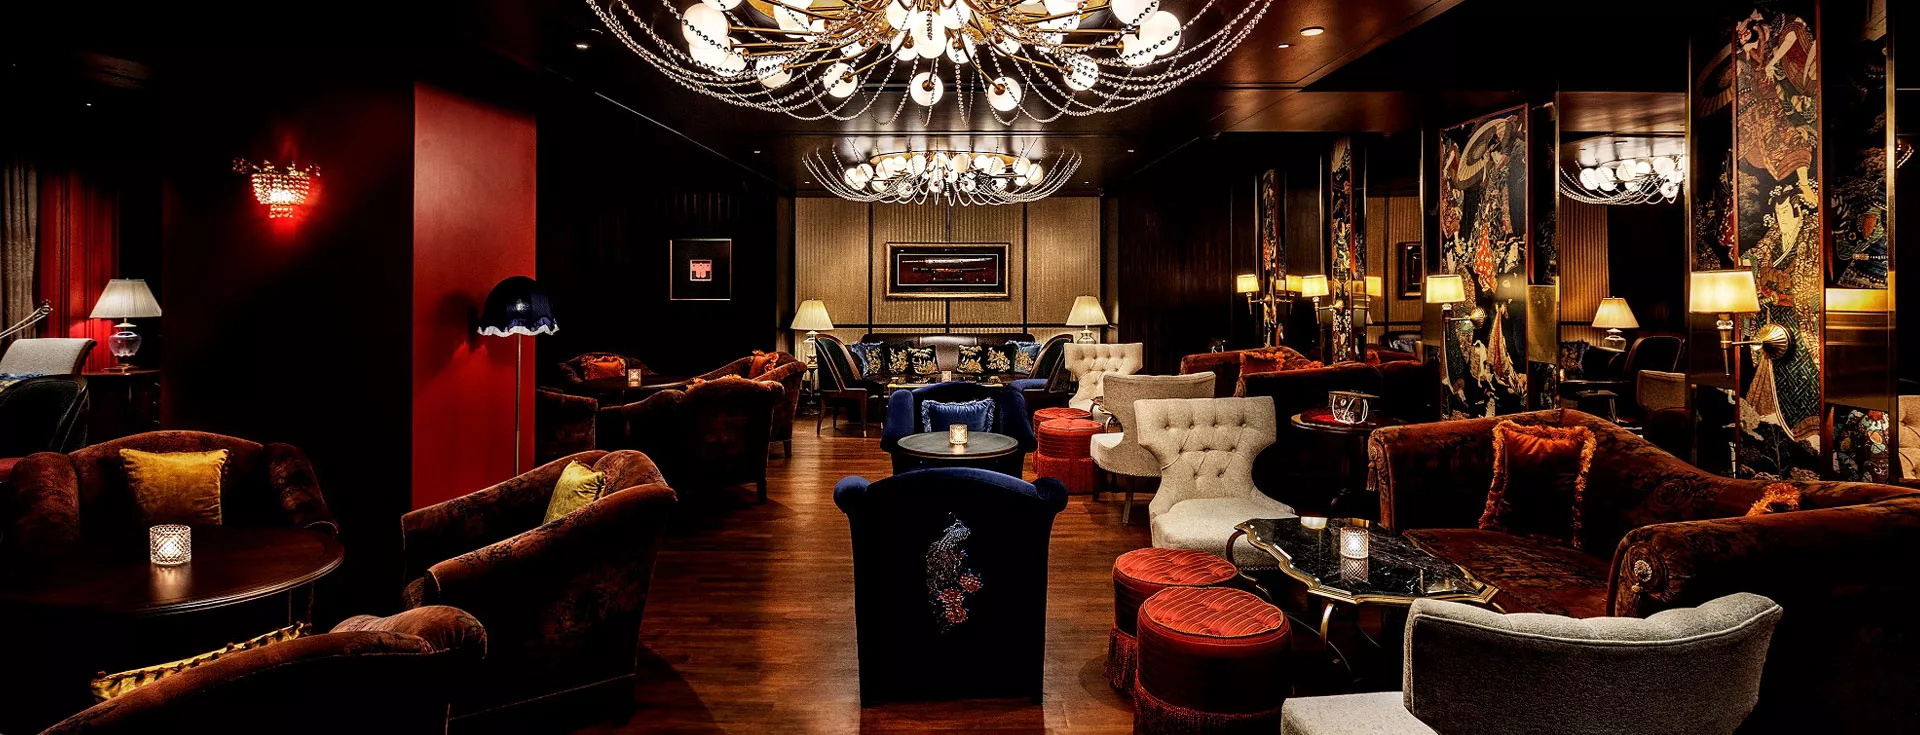 ZLB23 at the leela palace Bengaluru Recognised as ‘The Best Bar in India’